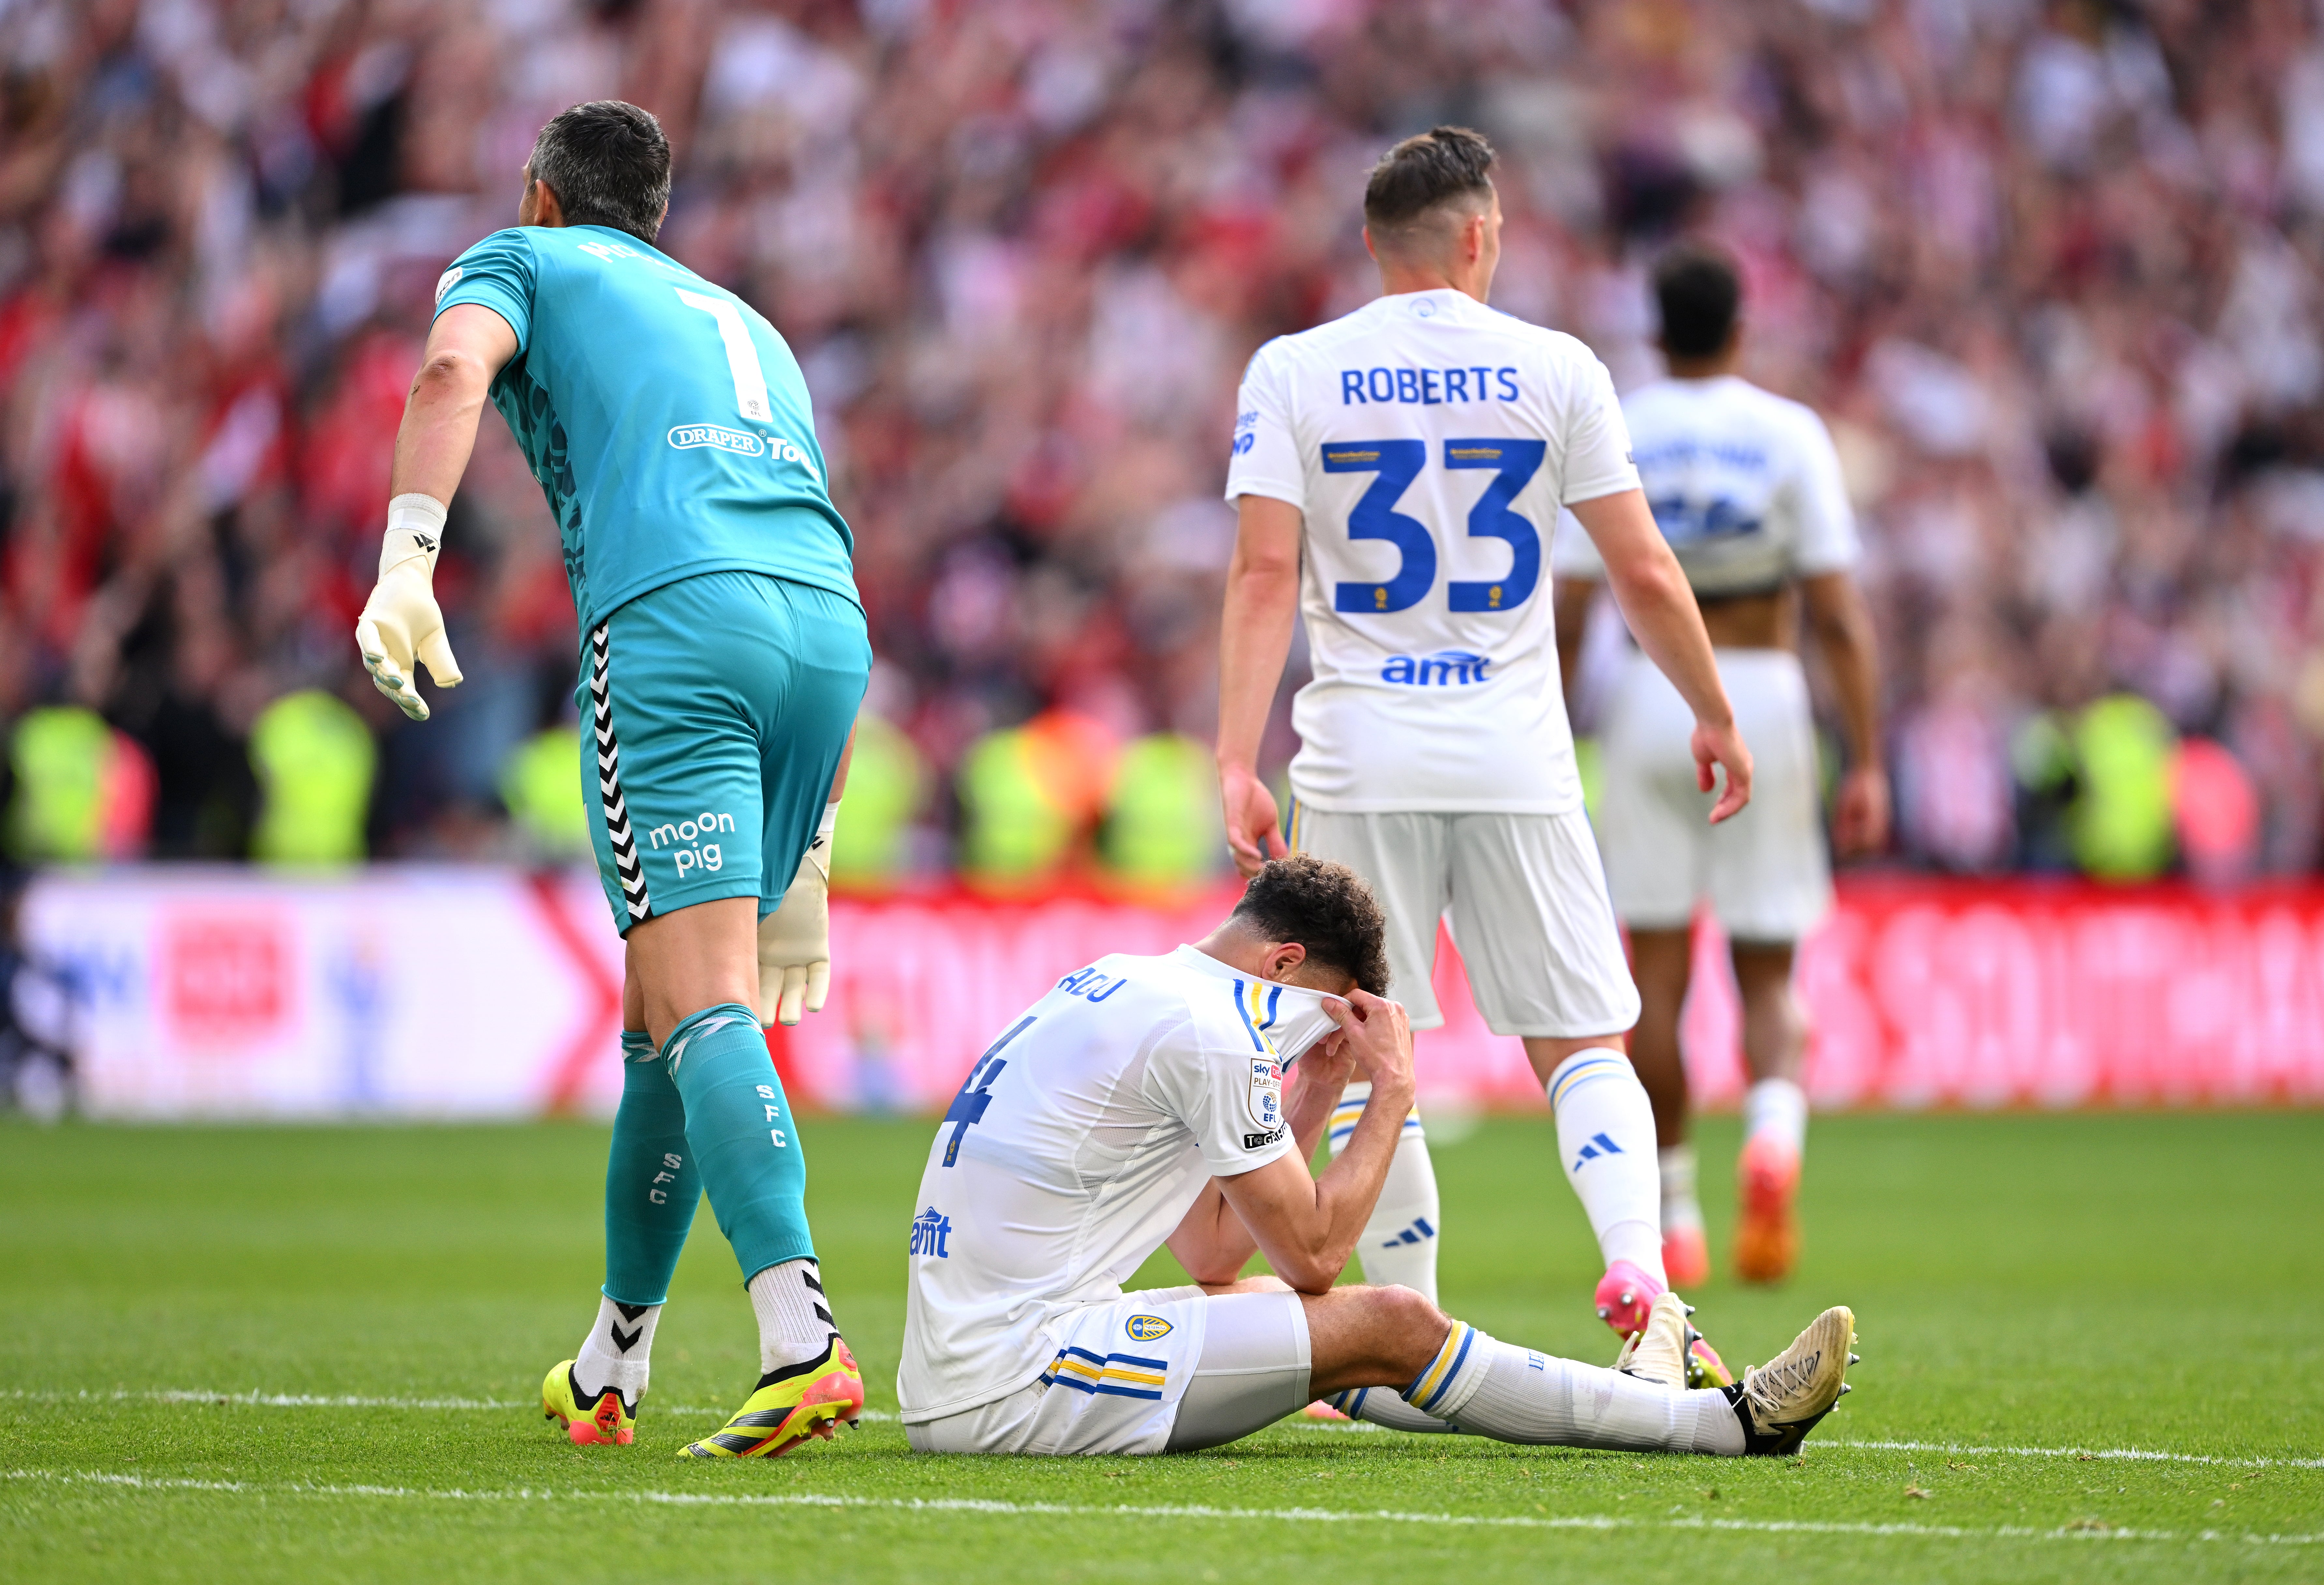 Leeds were beaten 1-0 by Southampton in the Championship play-off final on Sunday